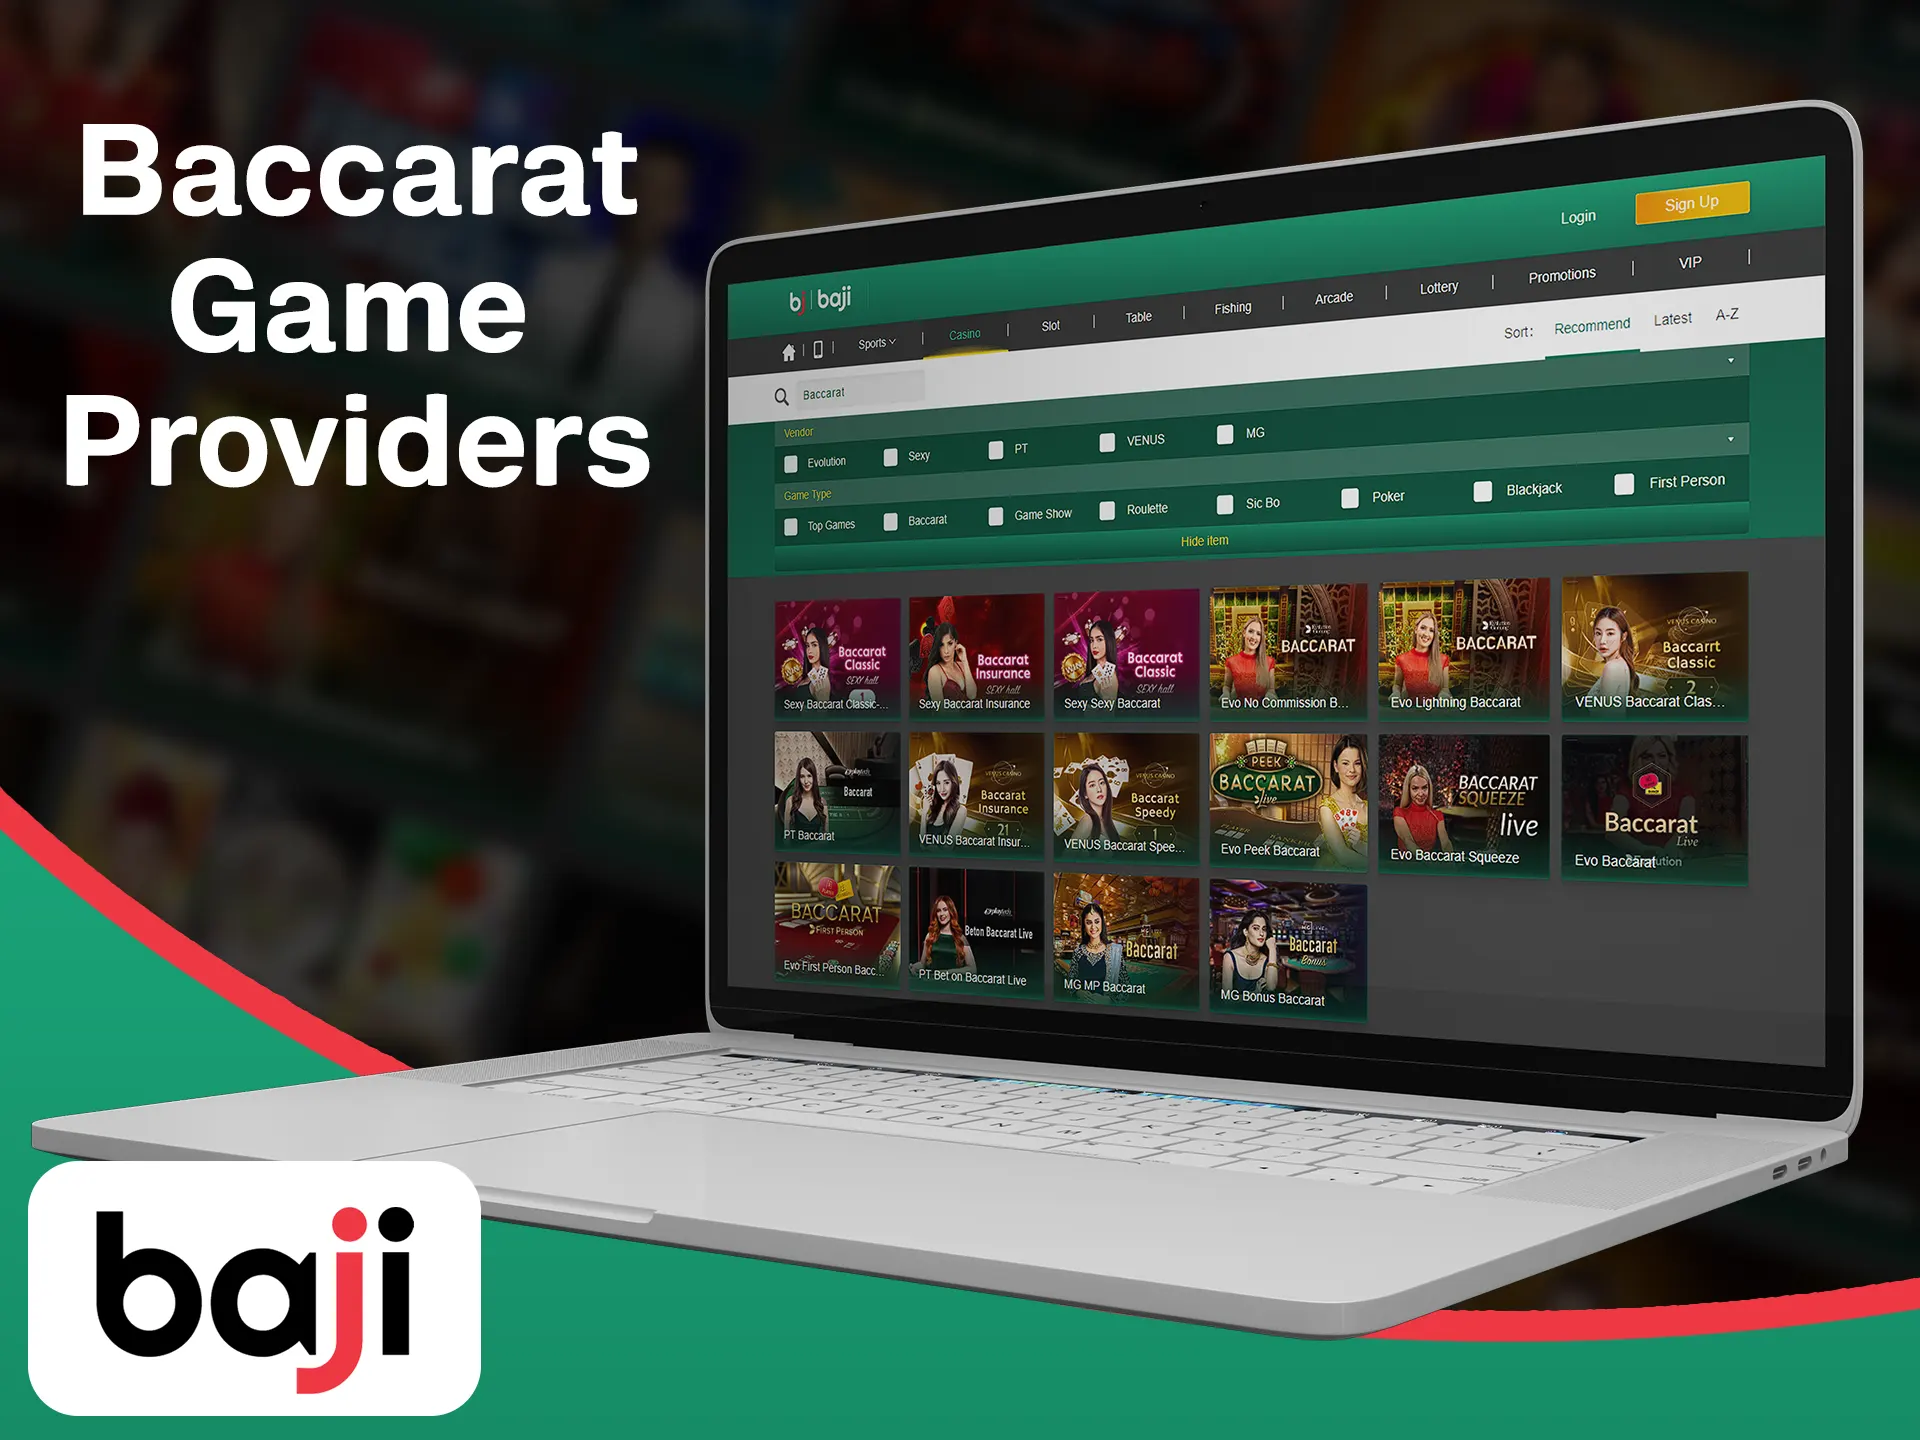 Check for all of the available baccarat game providers at the Baji.